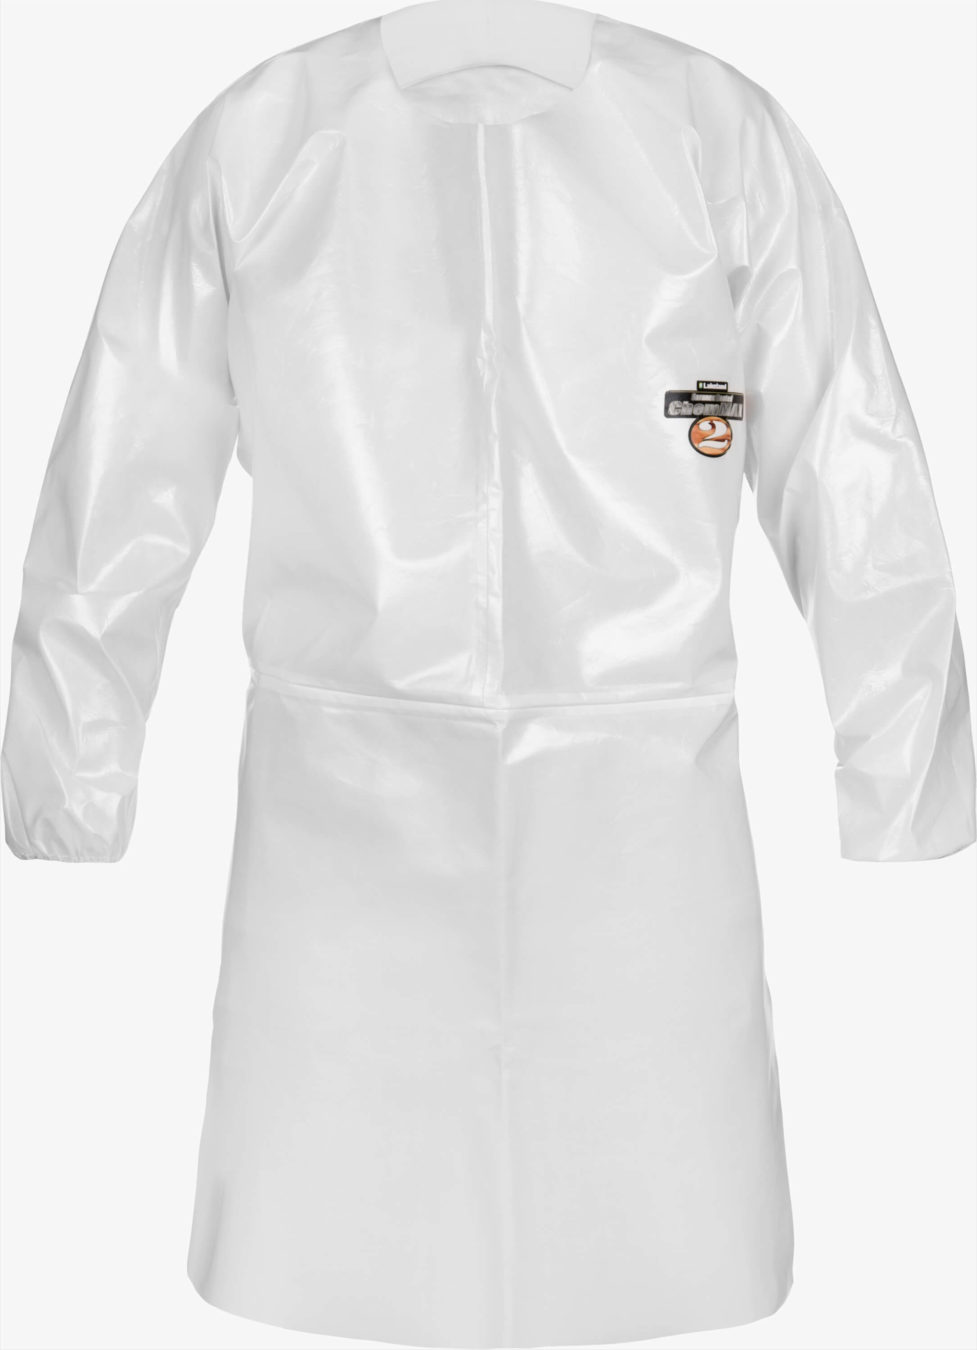 ChemMax® 2 Long Sleeve Apron - Disposable Clothing